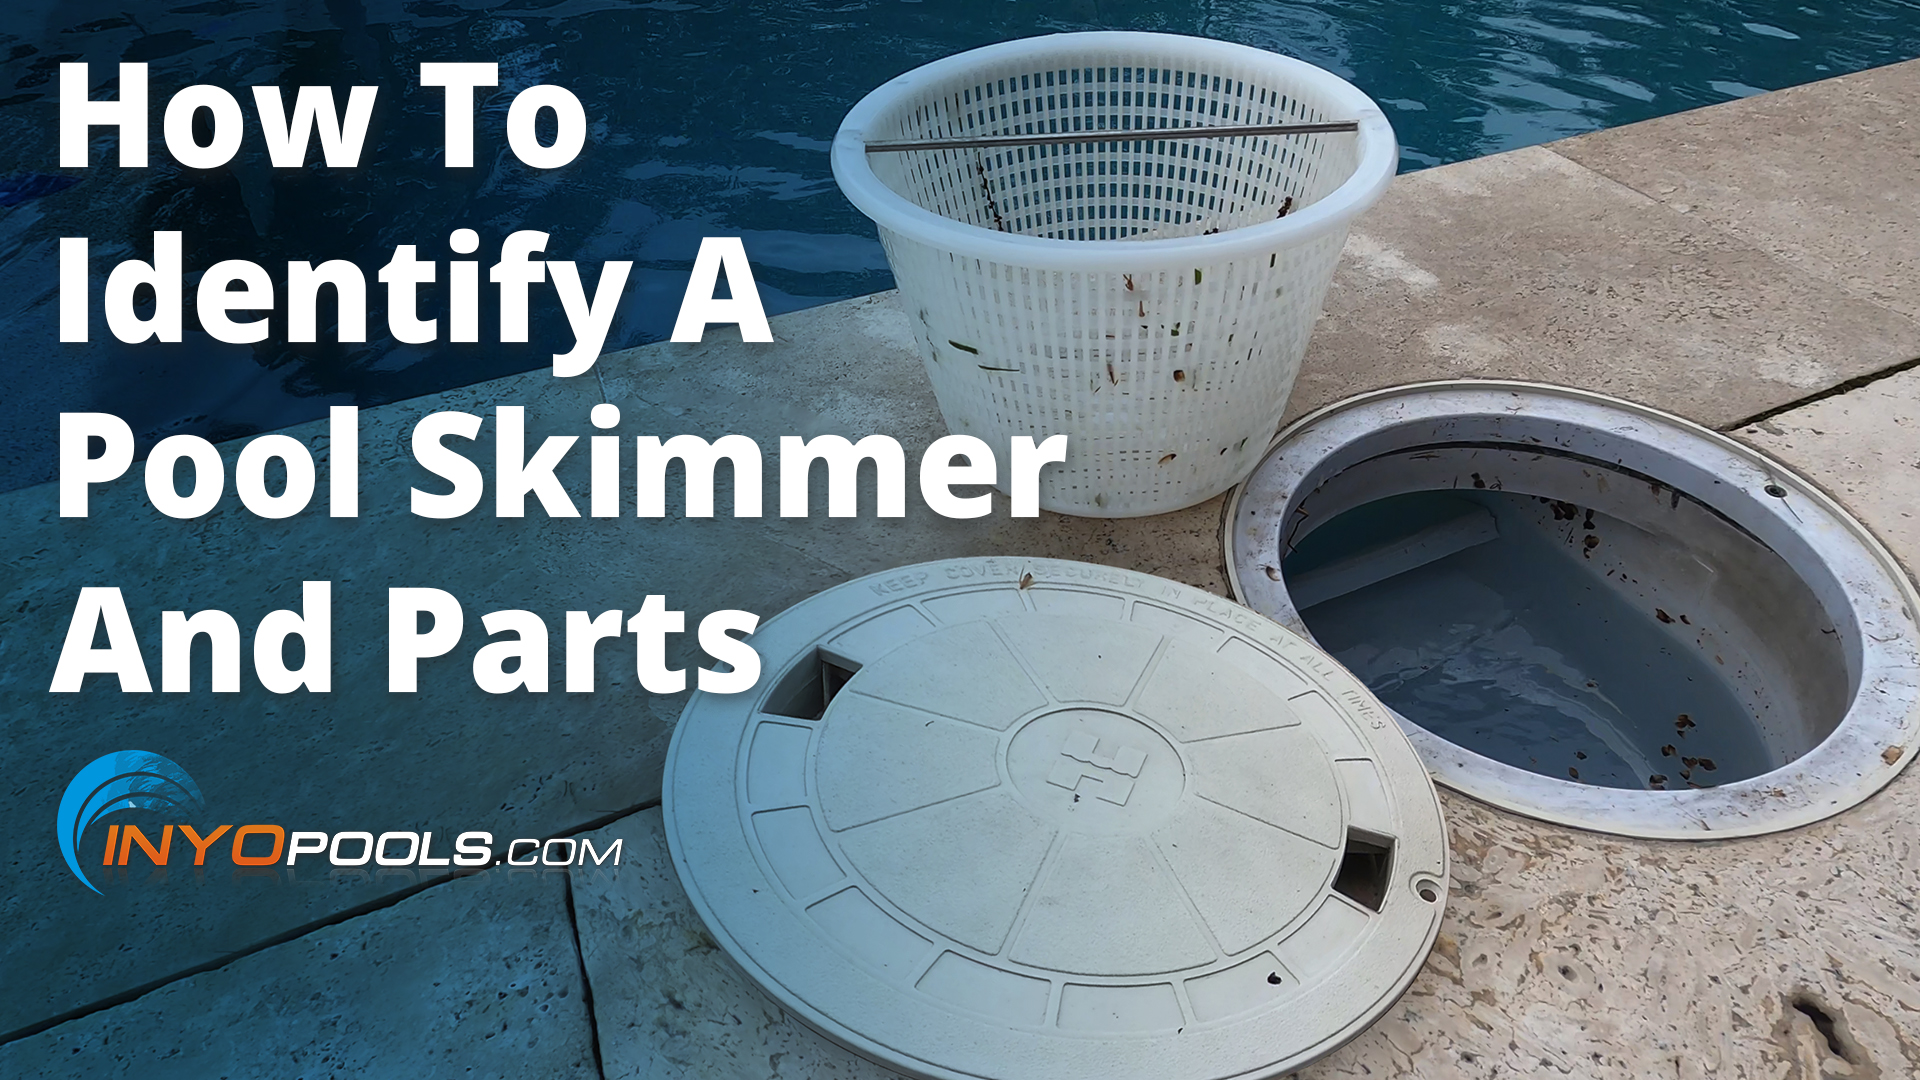 How To Identify A Pool Skimmer And Parts - INYOPools.com - DIY ...